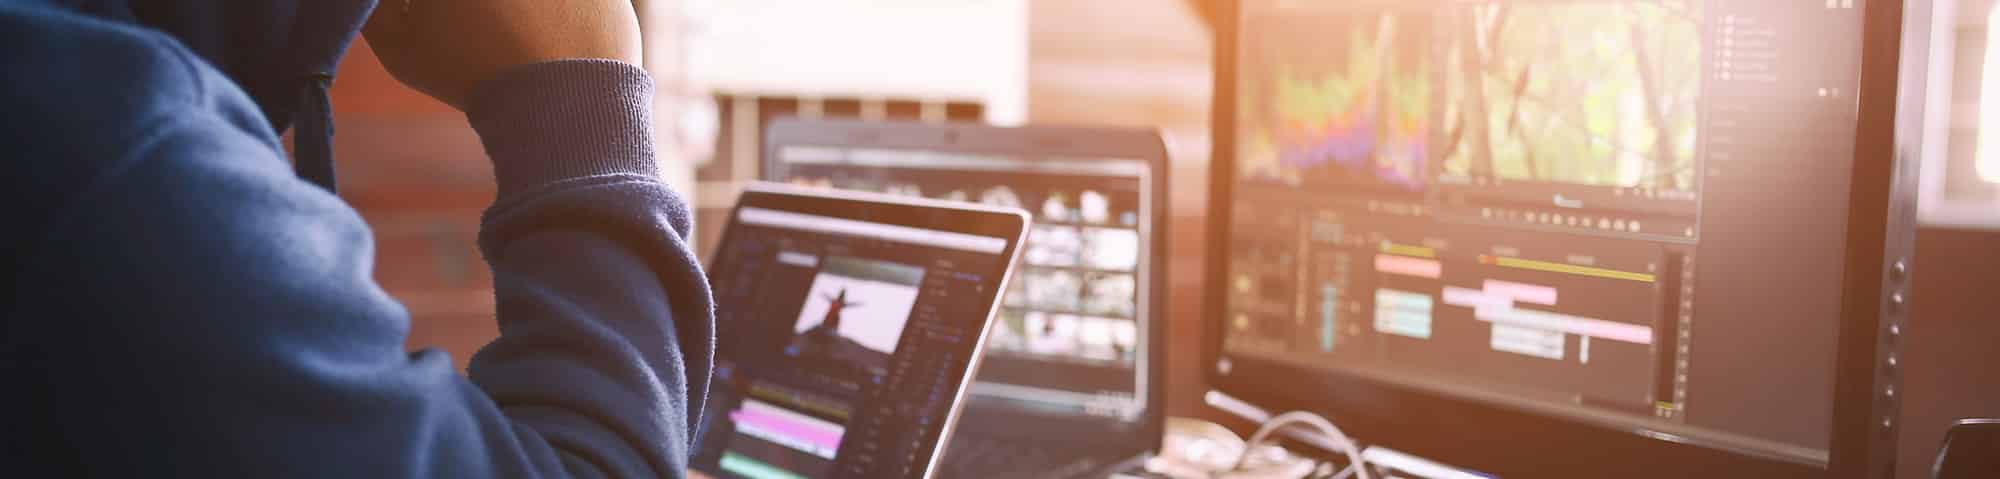 Five Guidelines for Becoming a Video Editor